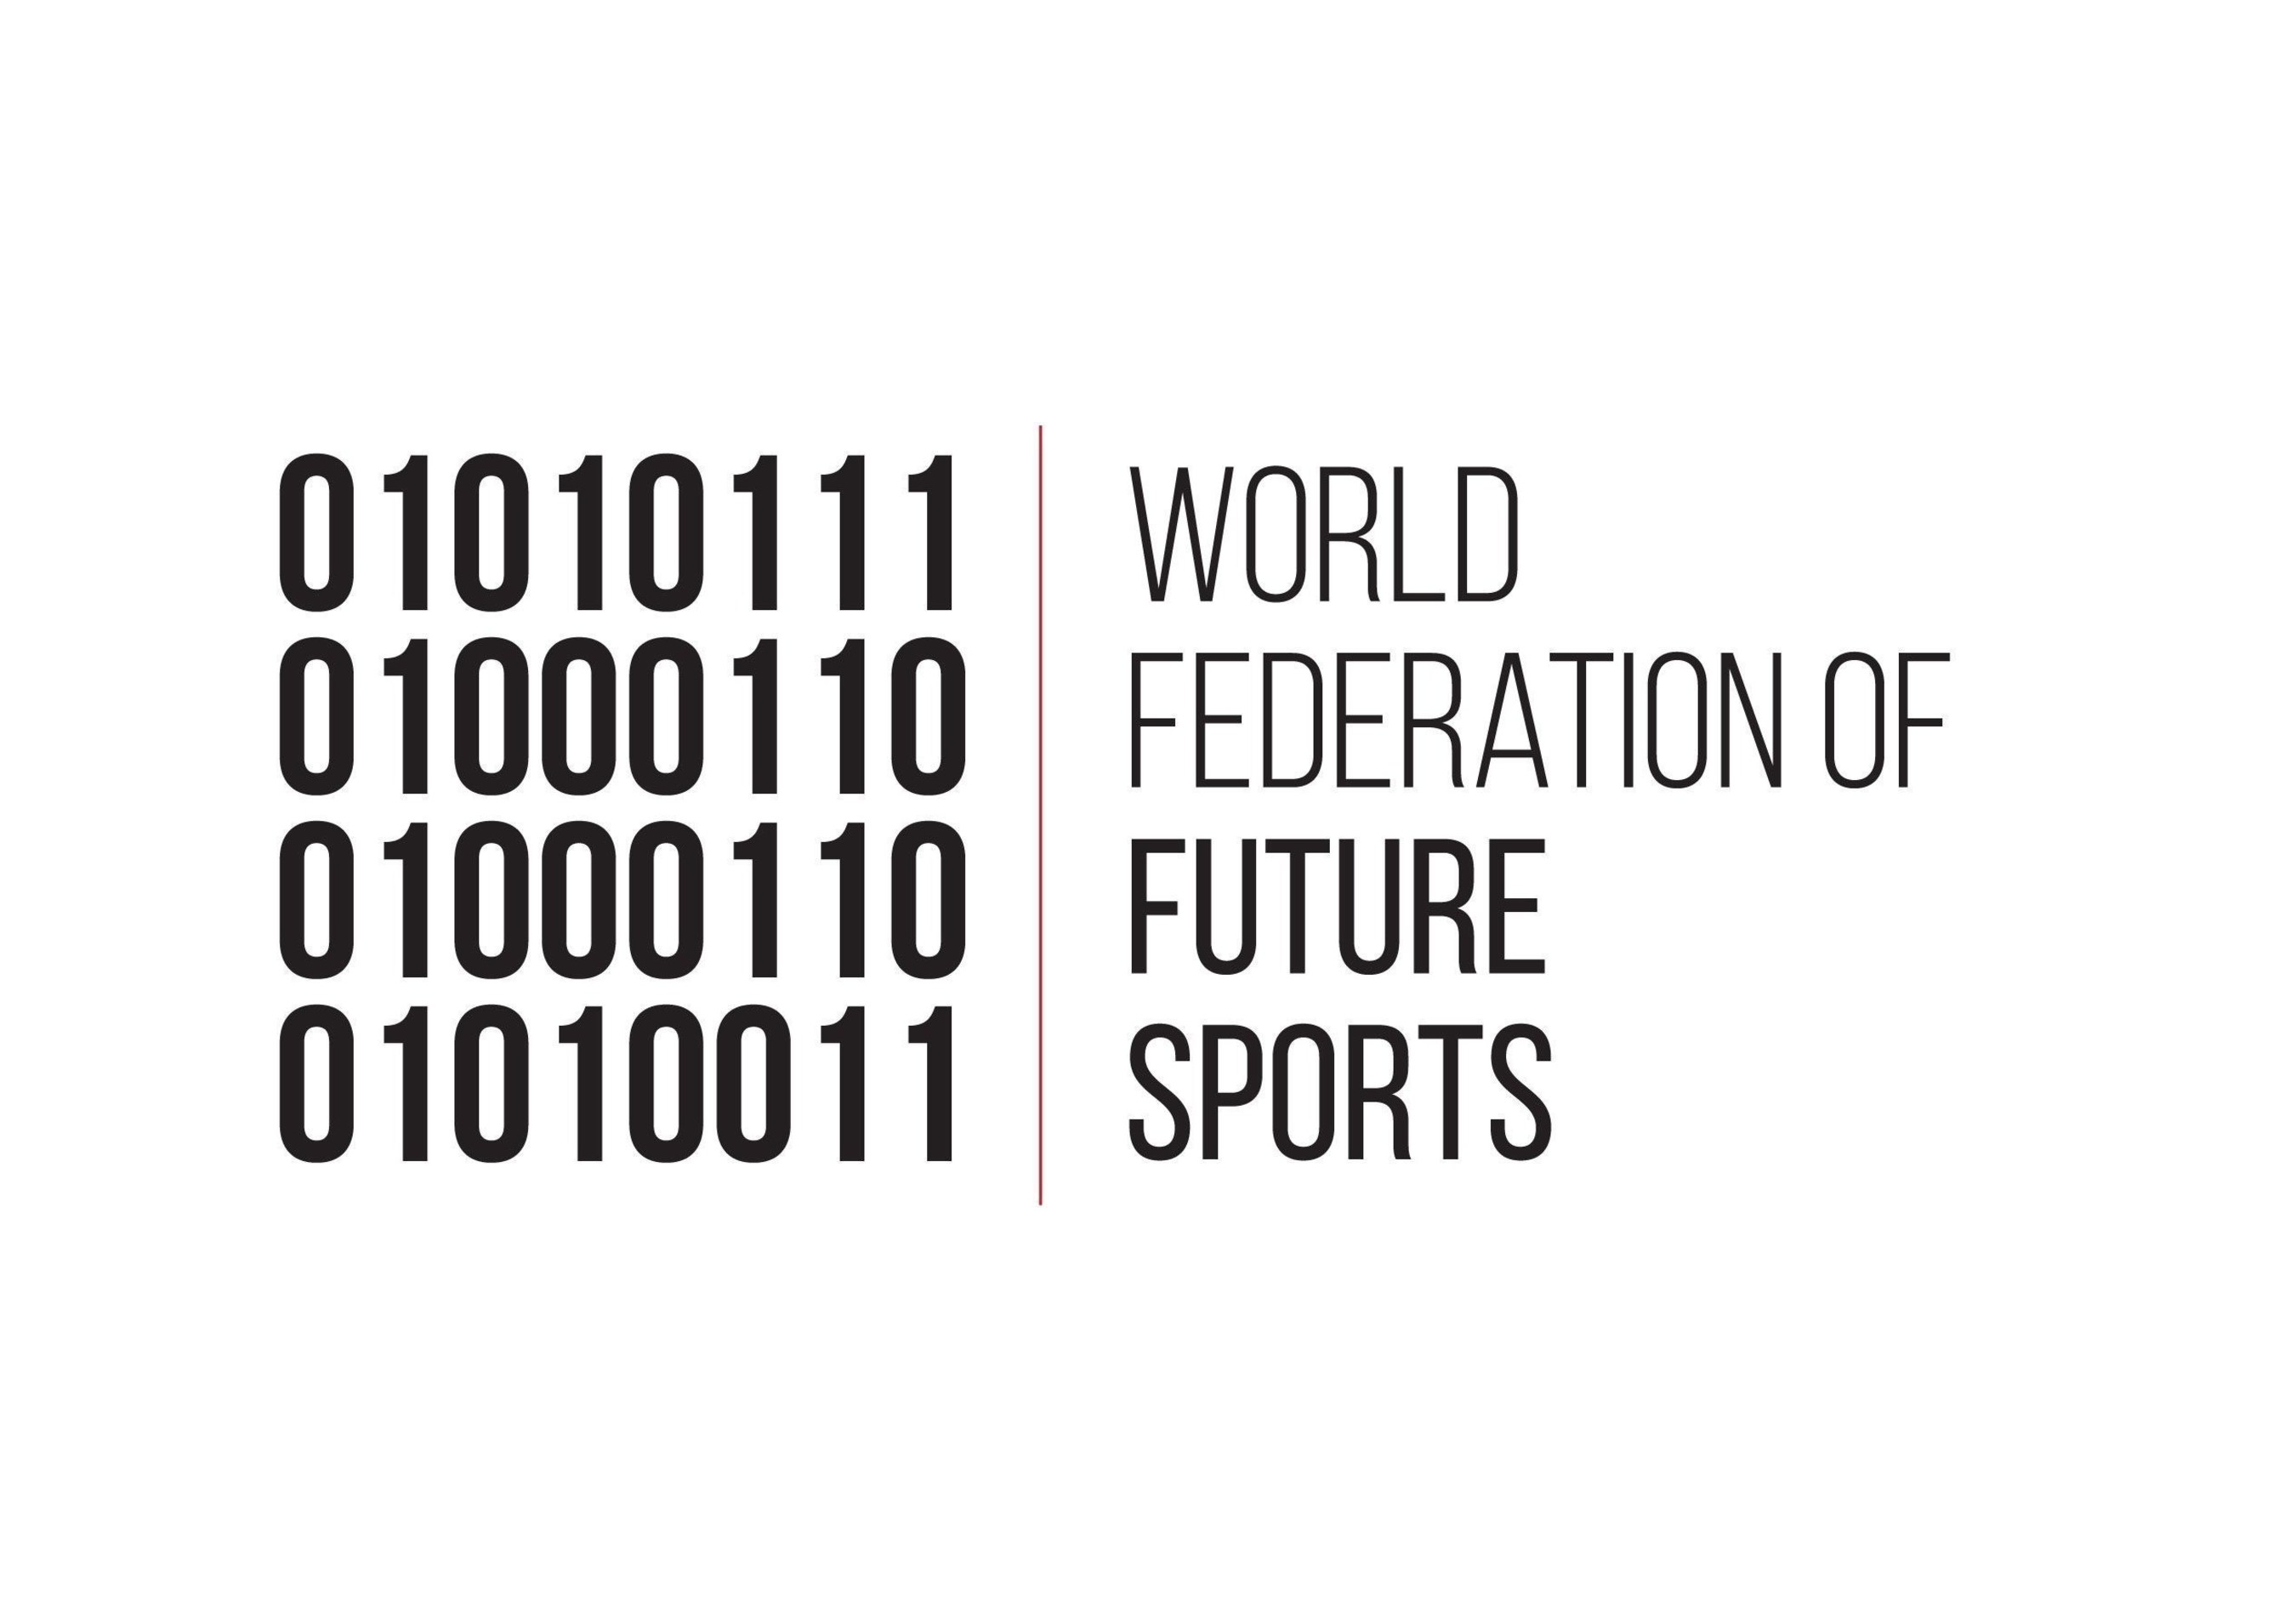 The official logo of The World Federation of Future Sports (PRNewsFoto/Dubai Museum of the Future) (PRNewsFoto/Dubai Museum of the Future)